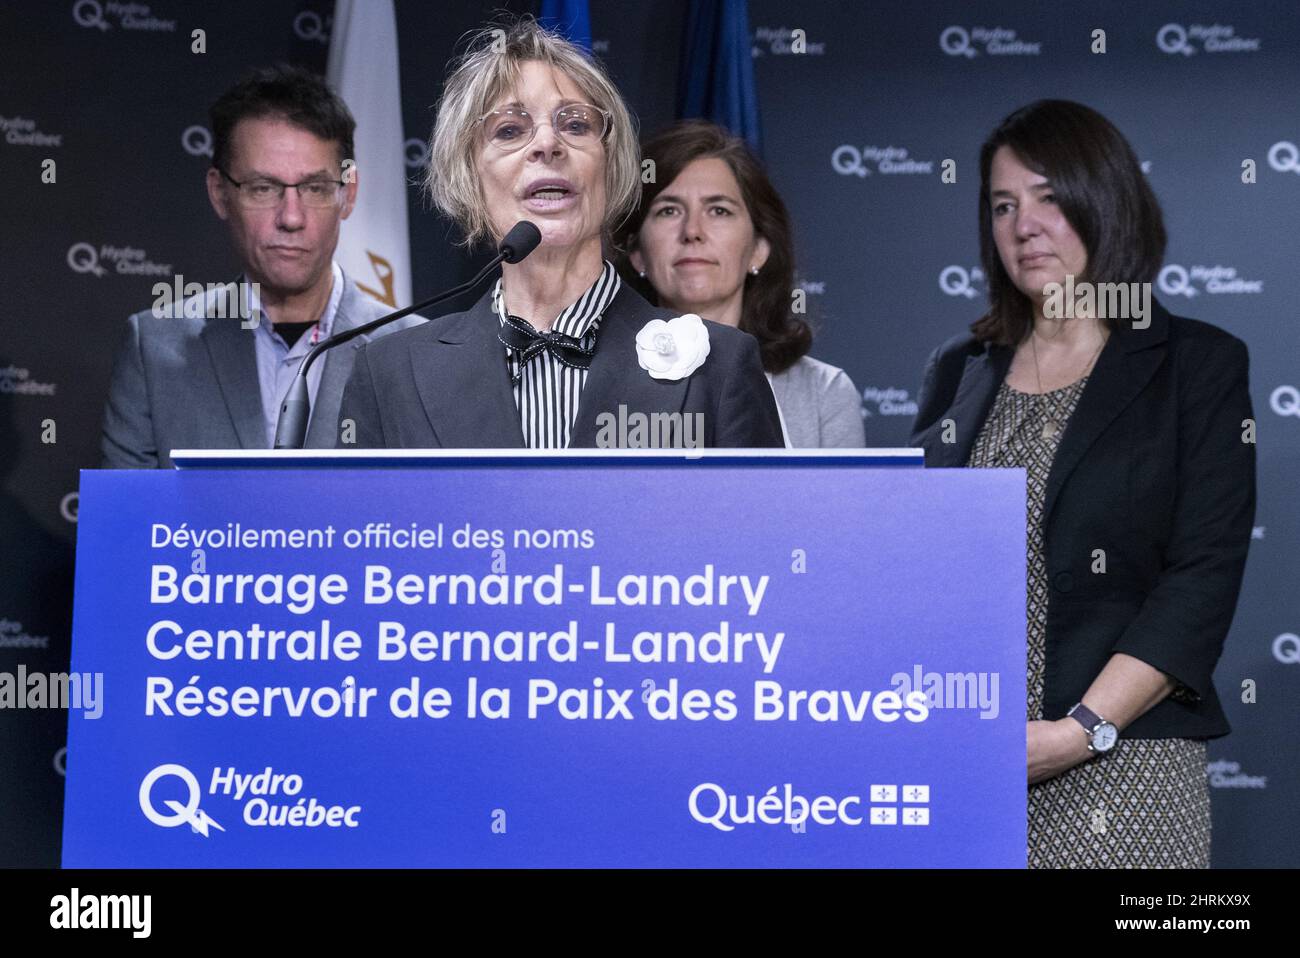 Chantal Renaud, wife of former Quebec premier Bernard Landry, addresses a ceremony renaming the hydroelectric facilities in the Eastmain-Sarcelle-Rupert complex in memory of Bernard Landry in Montreal on Monday, November 4, 2019. Behind are Landry's three children Philippe, Pascale and Julie-Anne. THE CANADIAN PRESS/Paul Chiasson Stock Photo